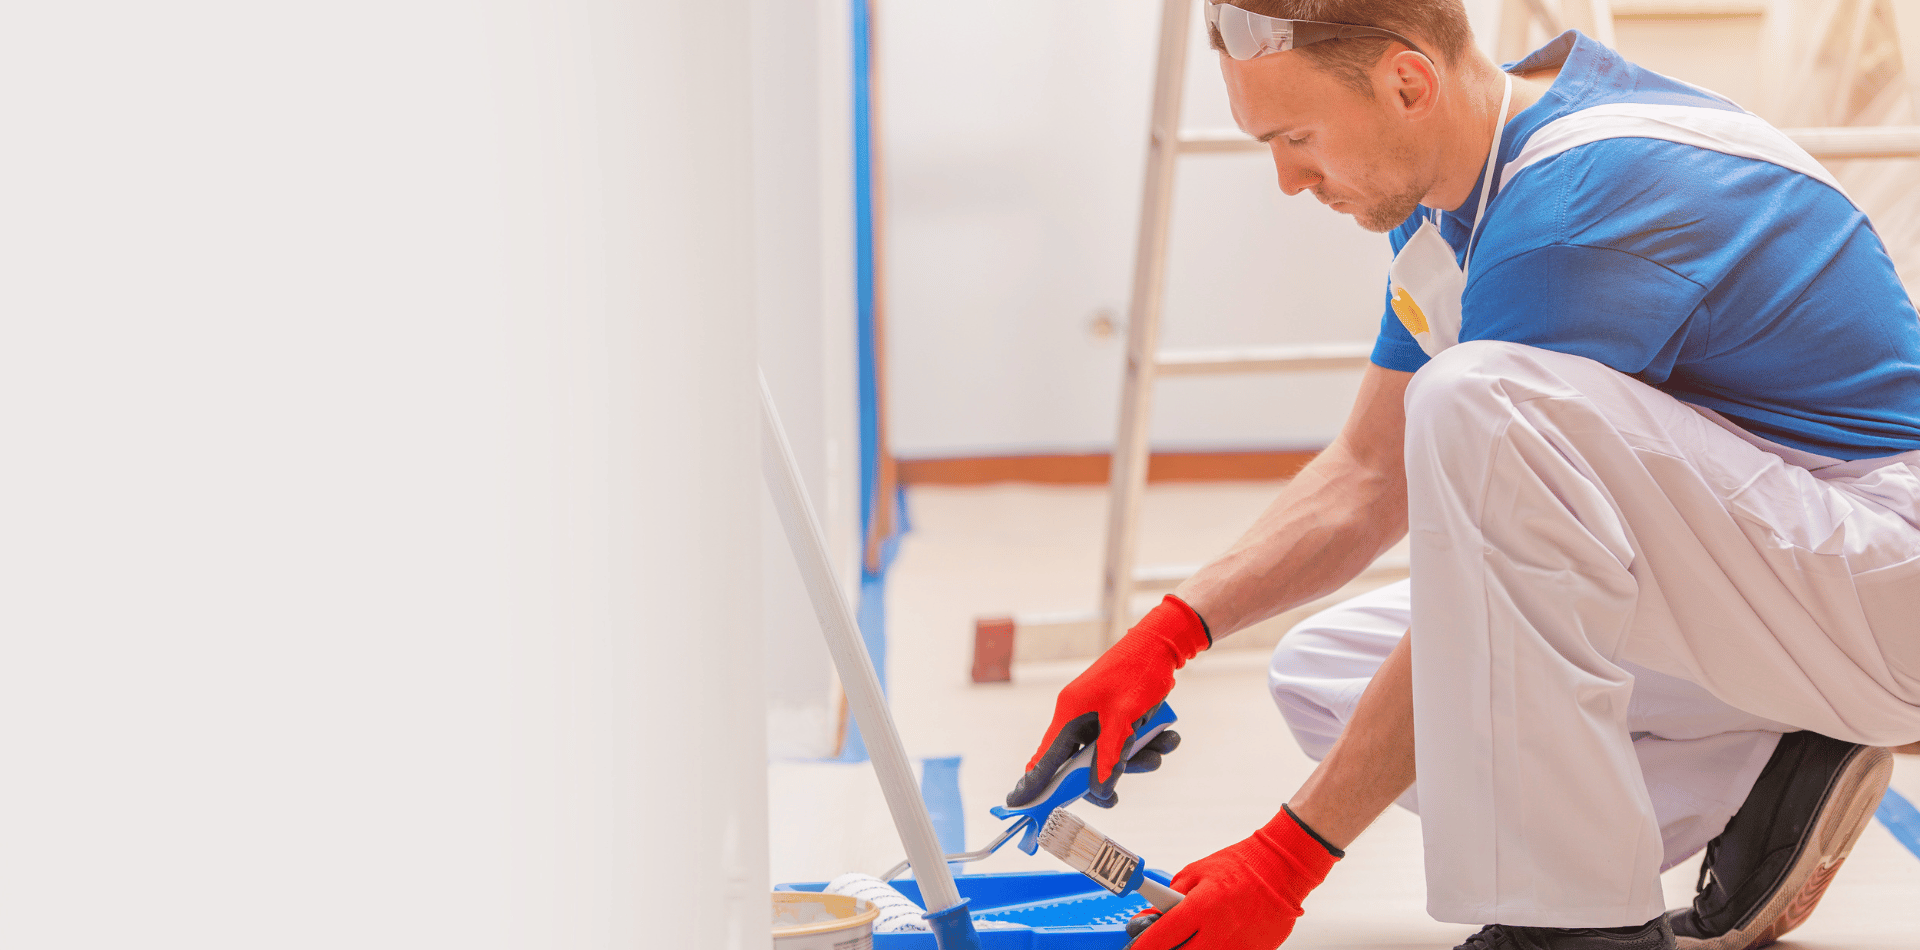 Professional Painter checking quality